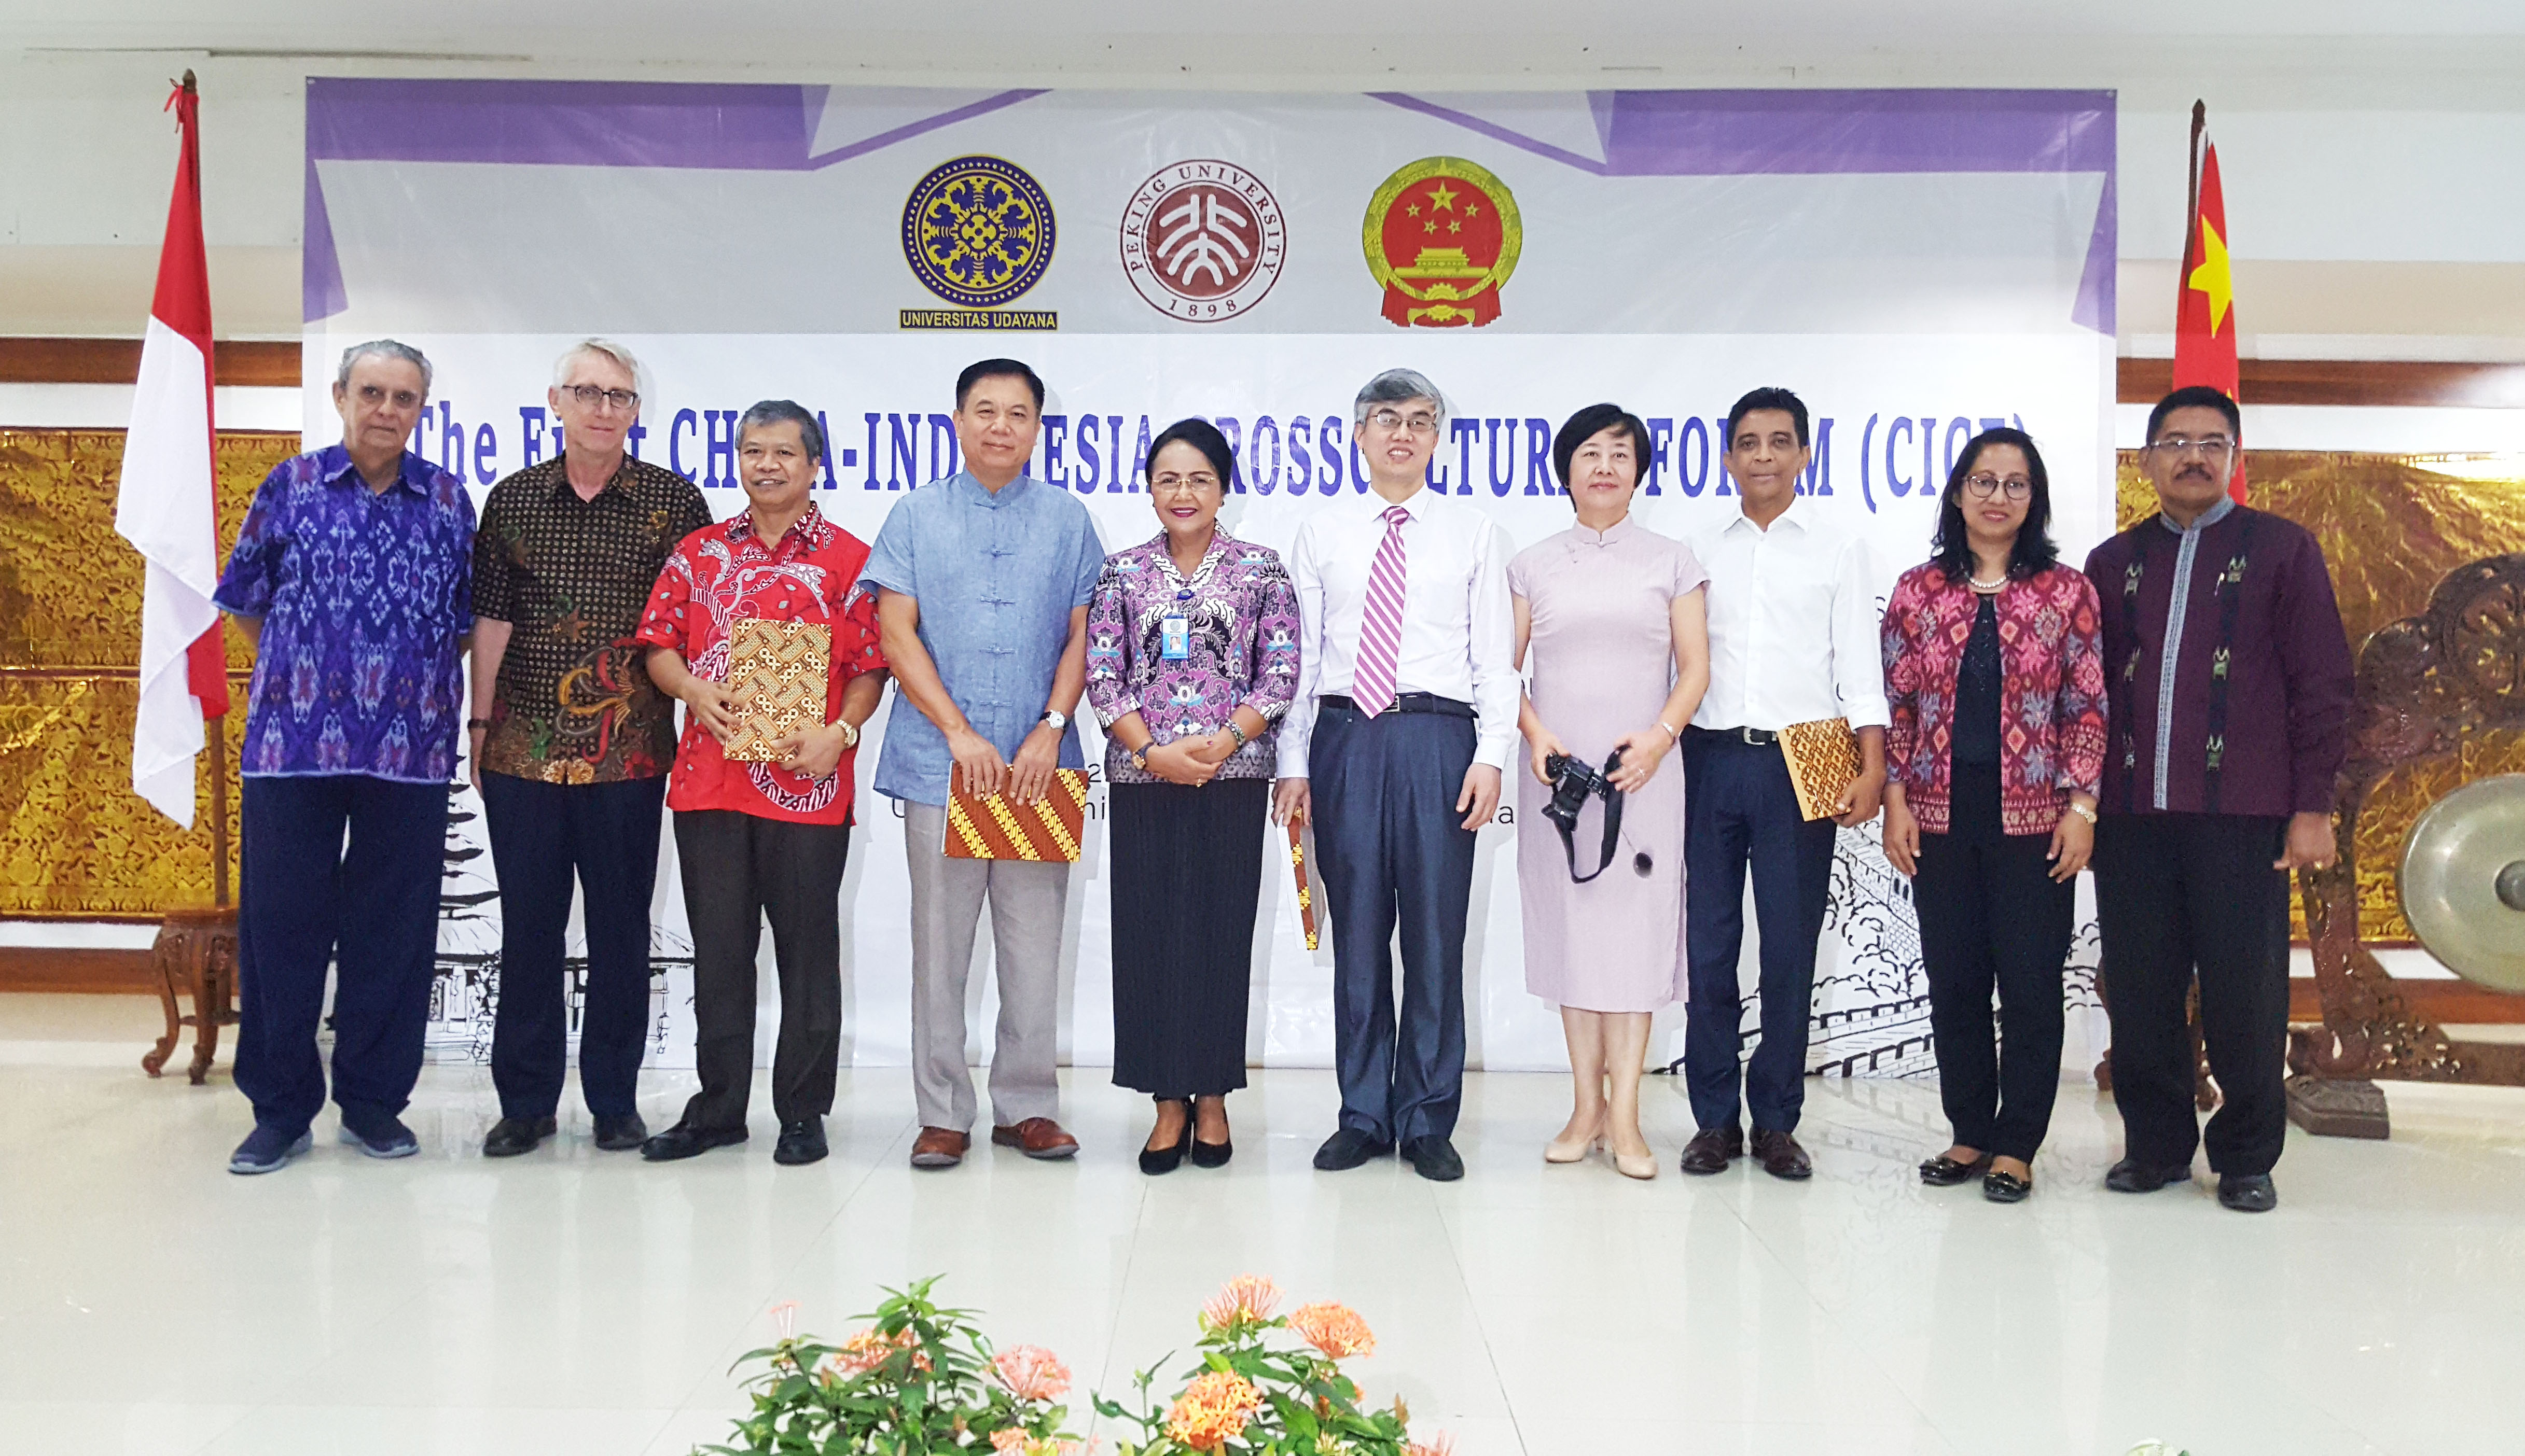 The First CHINA-INDONESIA CROSS-CULTURAL FORUM (CICF)